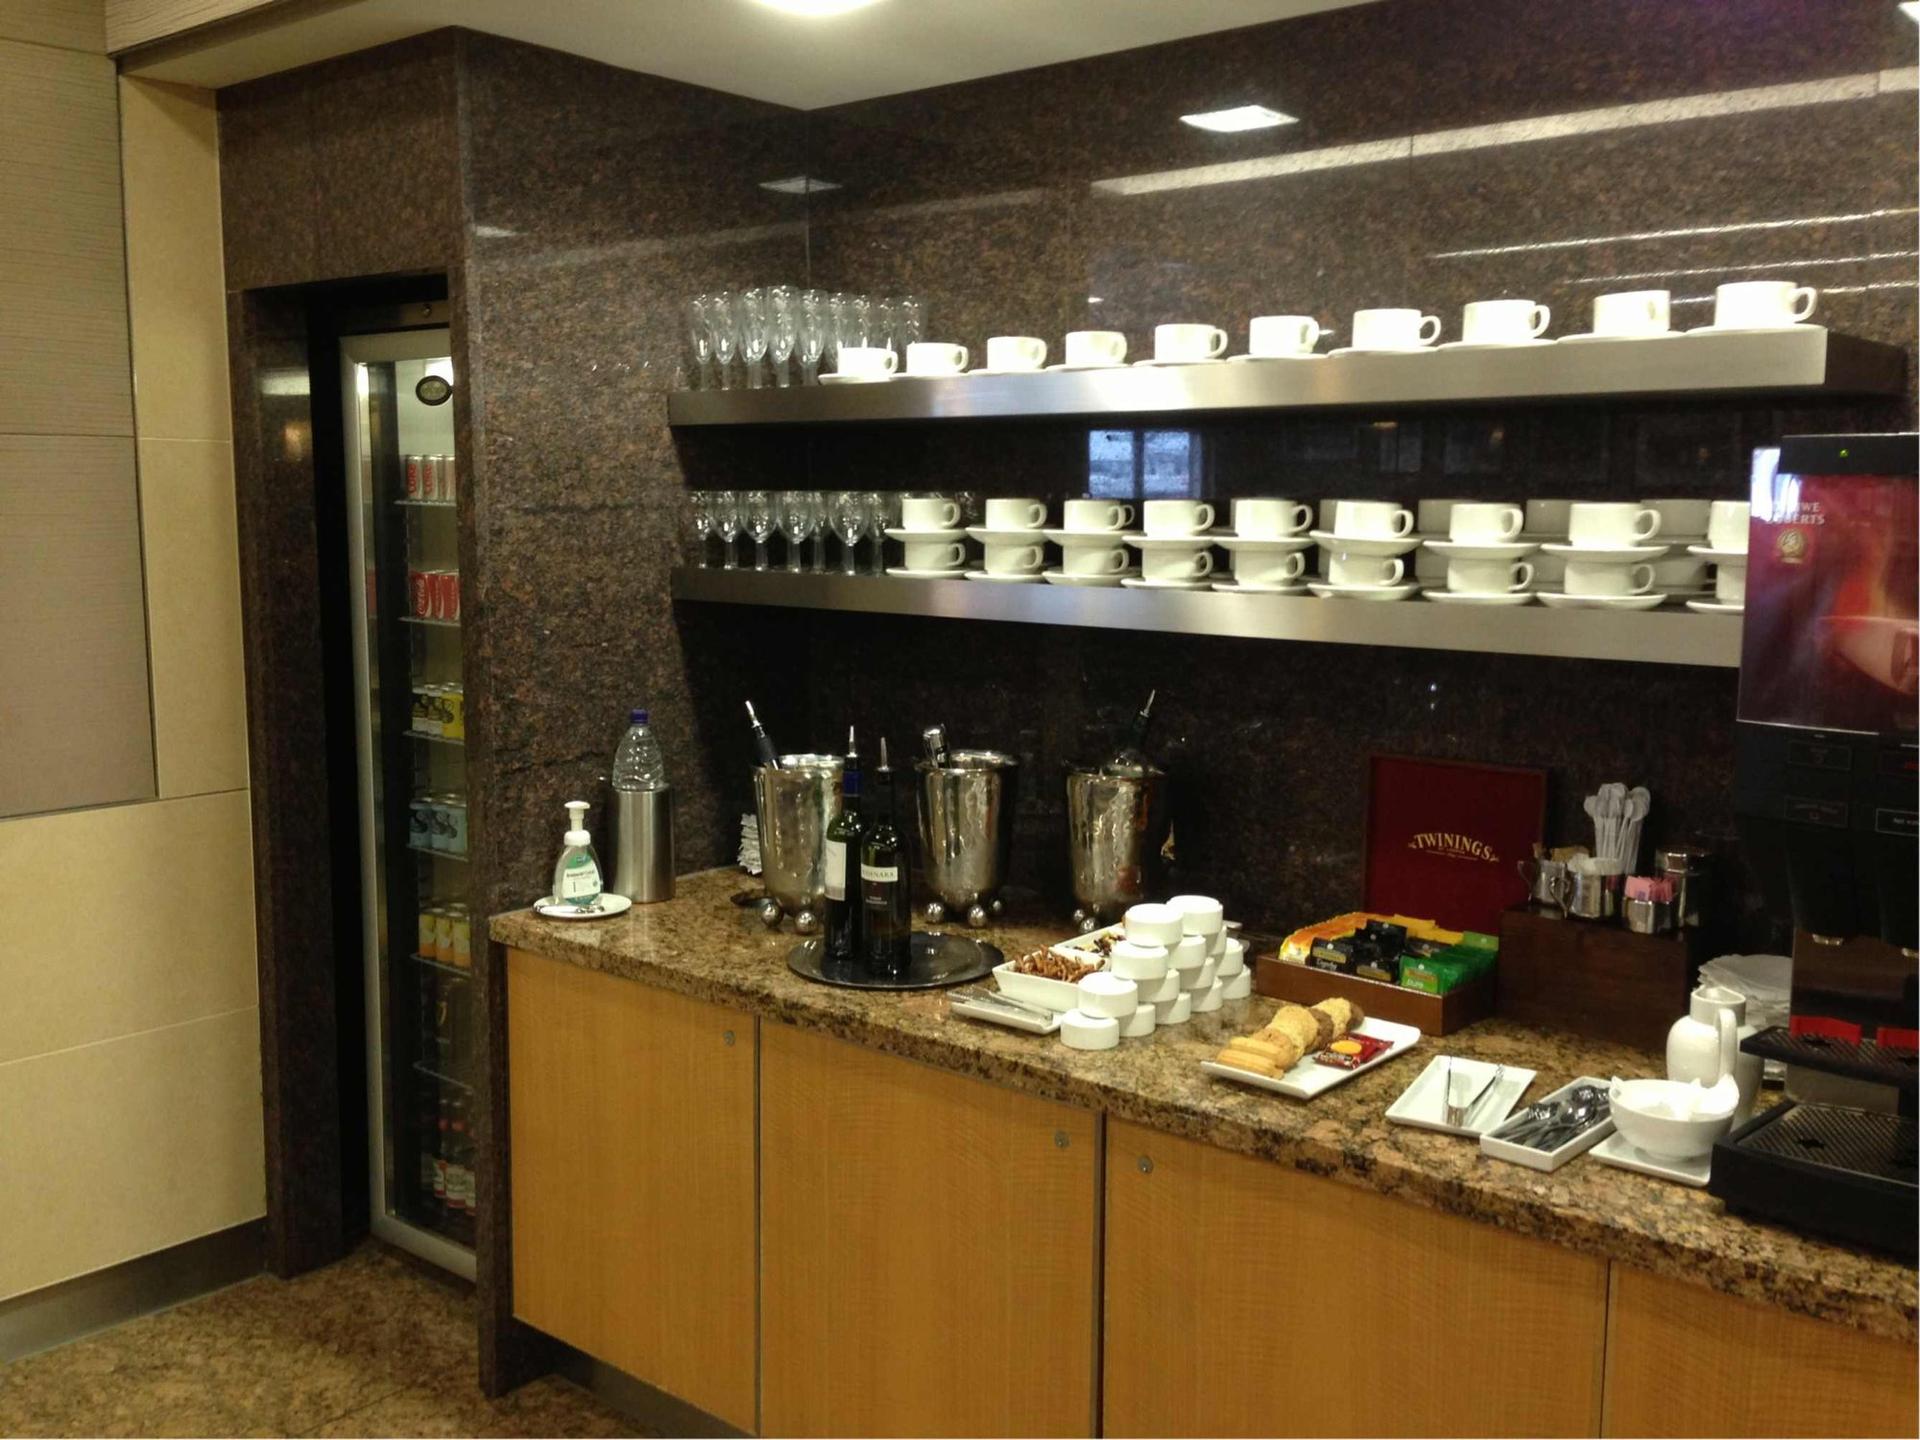 American Airlines International First Class Lounge image 5 of 16